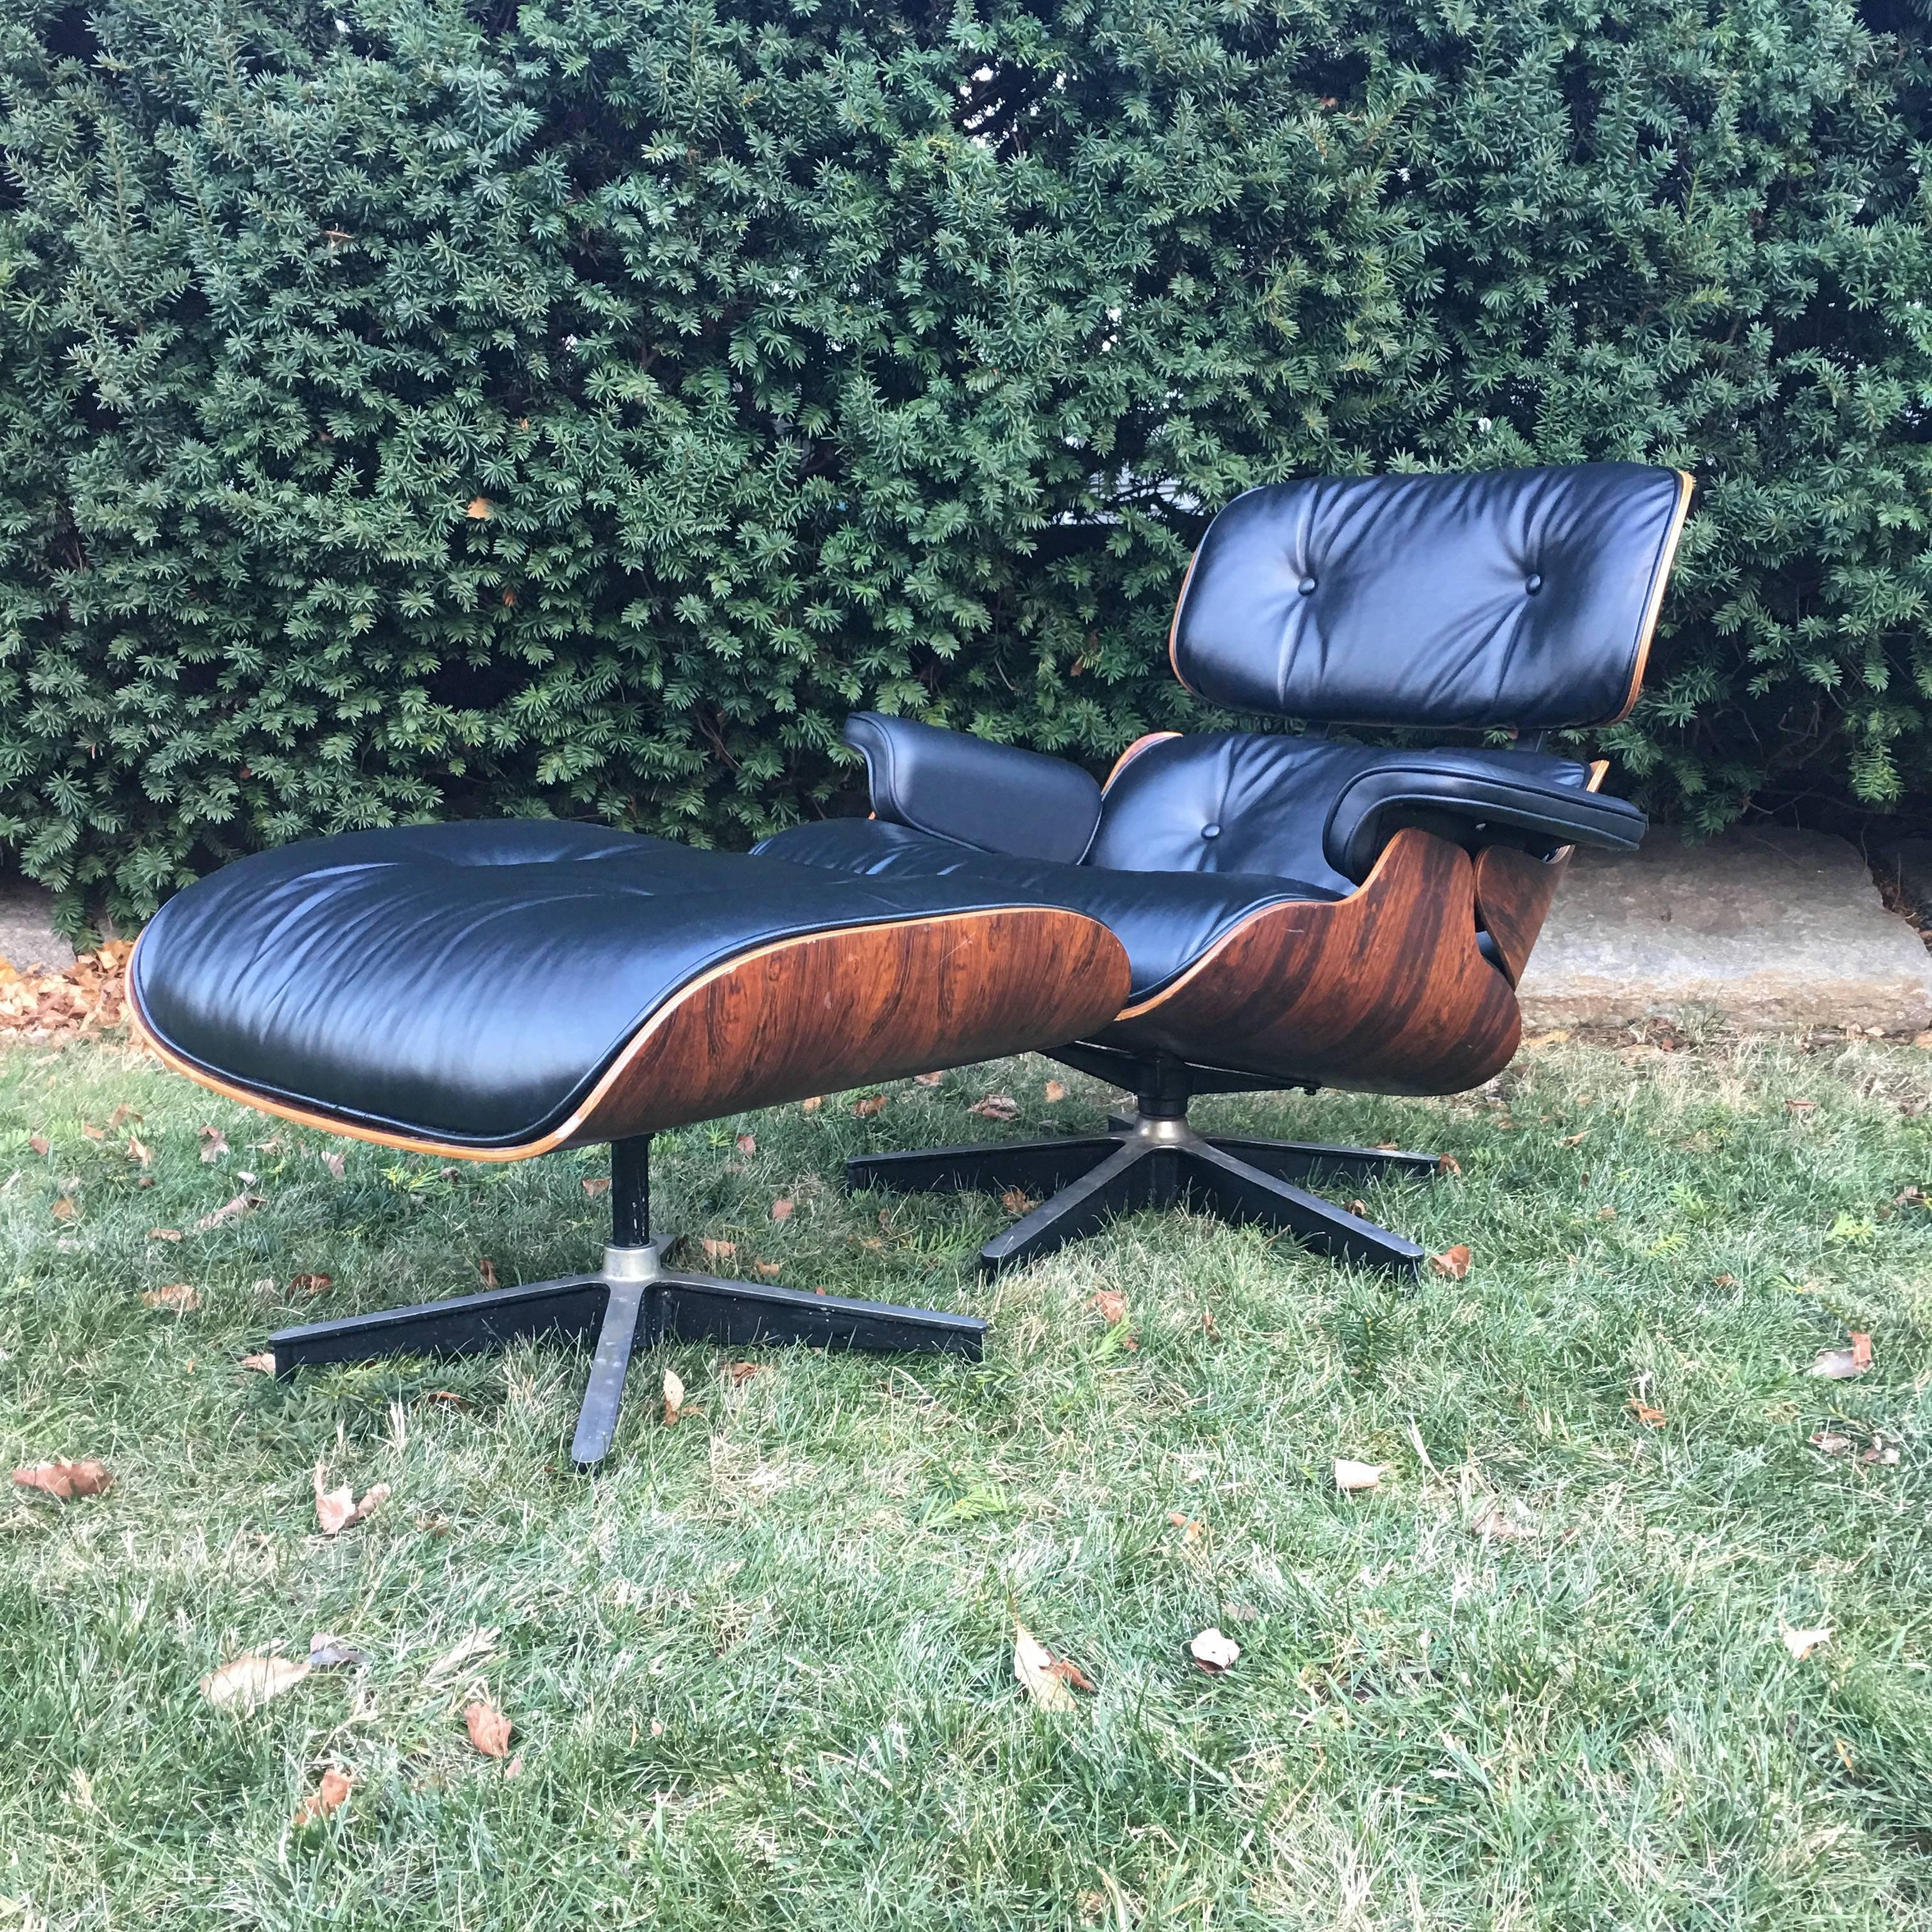 Superb edition of the Classic Eames lounge chair and ottoman. New leather upholstery. Super grain and banding in the rosewood. Gorgeous color. Shock mounts are nice and tight. The epoxy was professionally redone. Simply a stunning set.